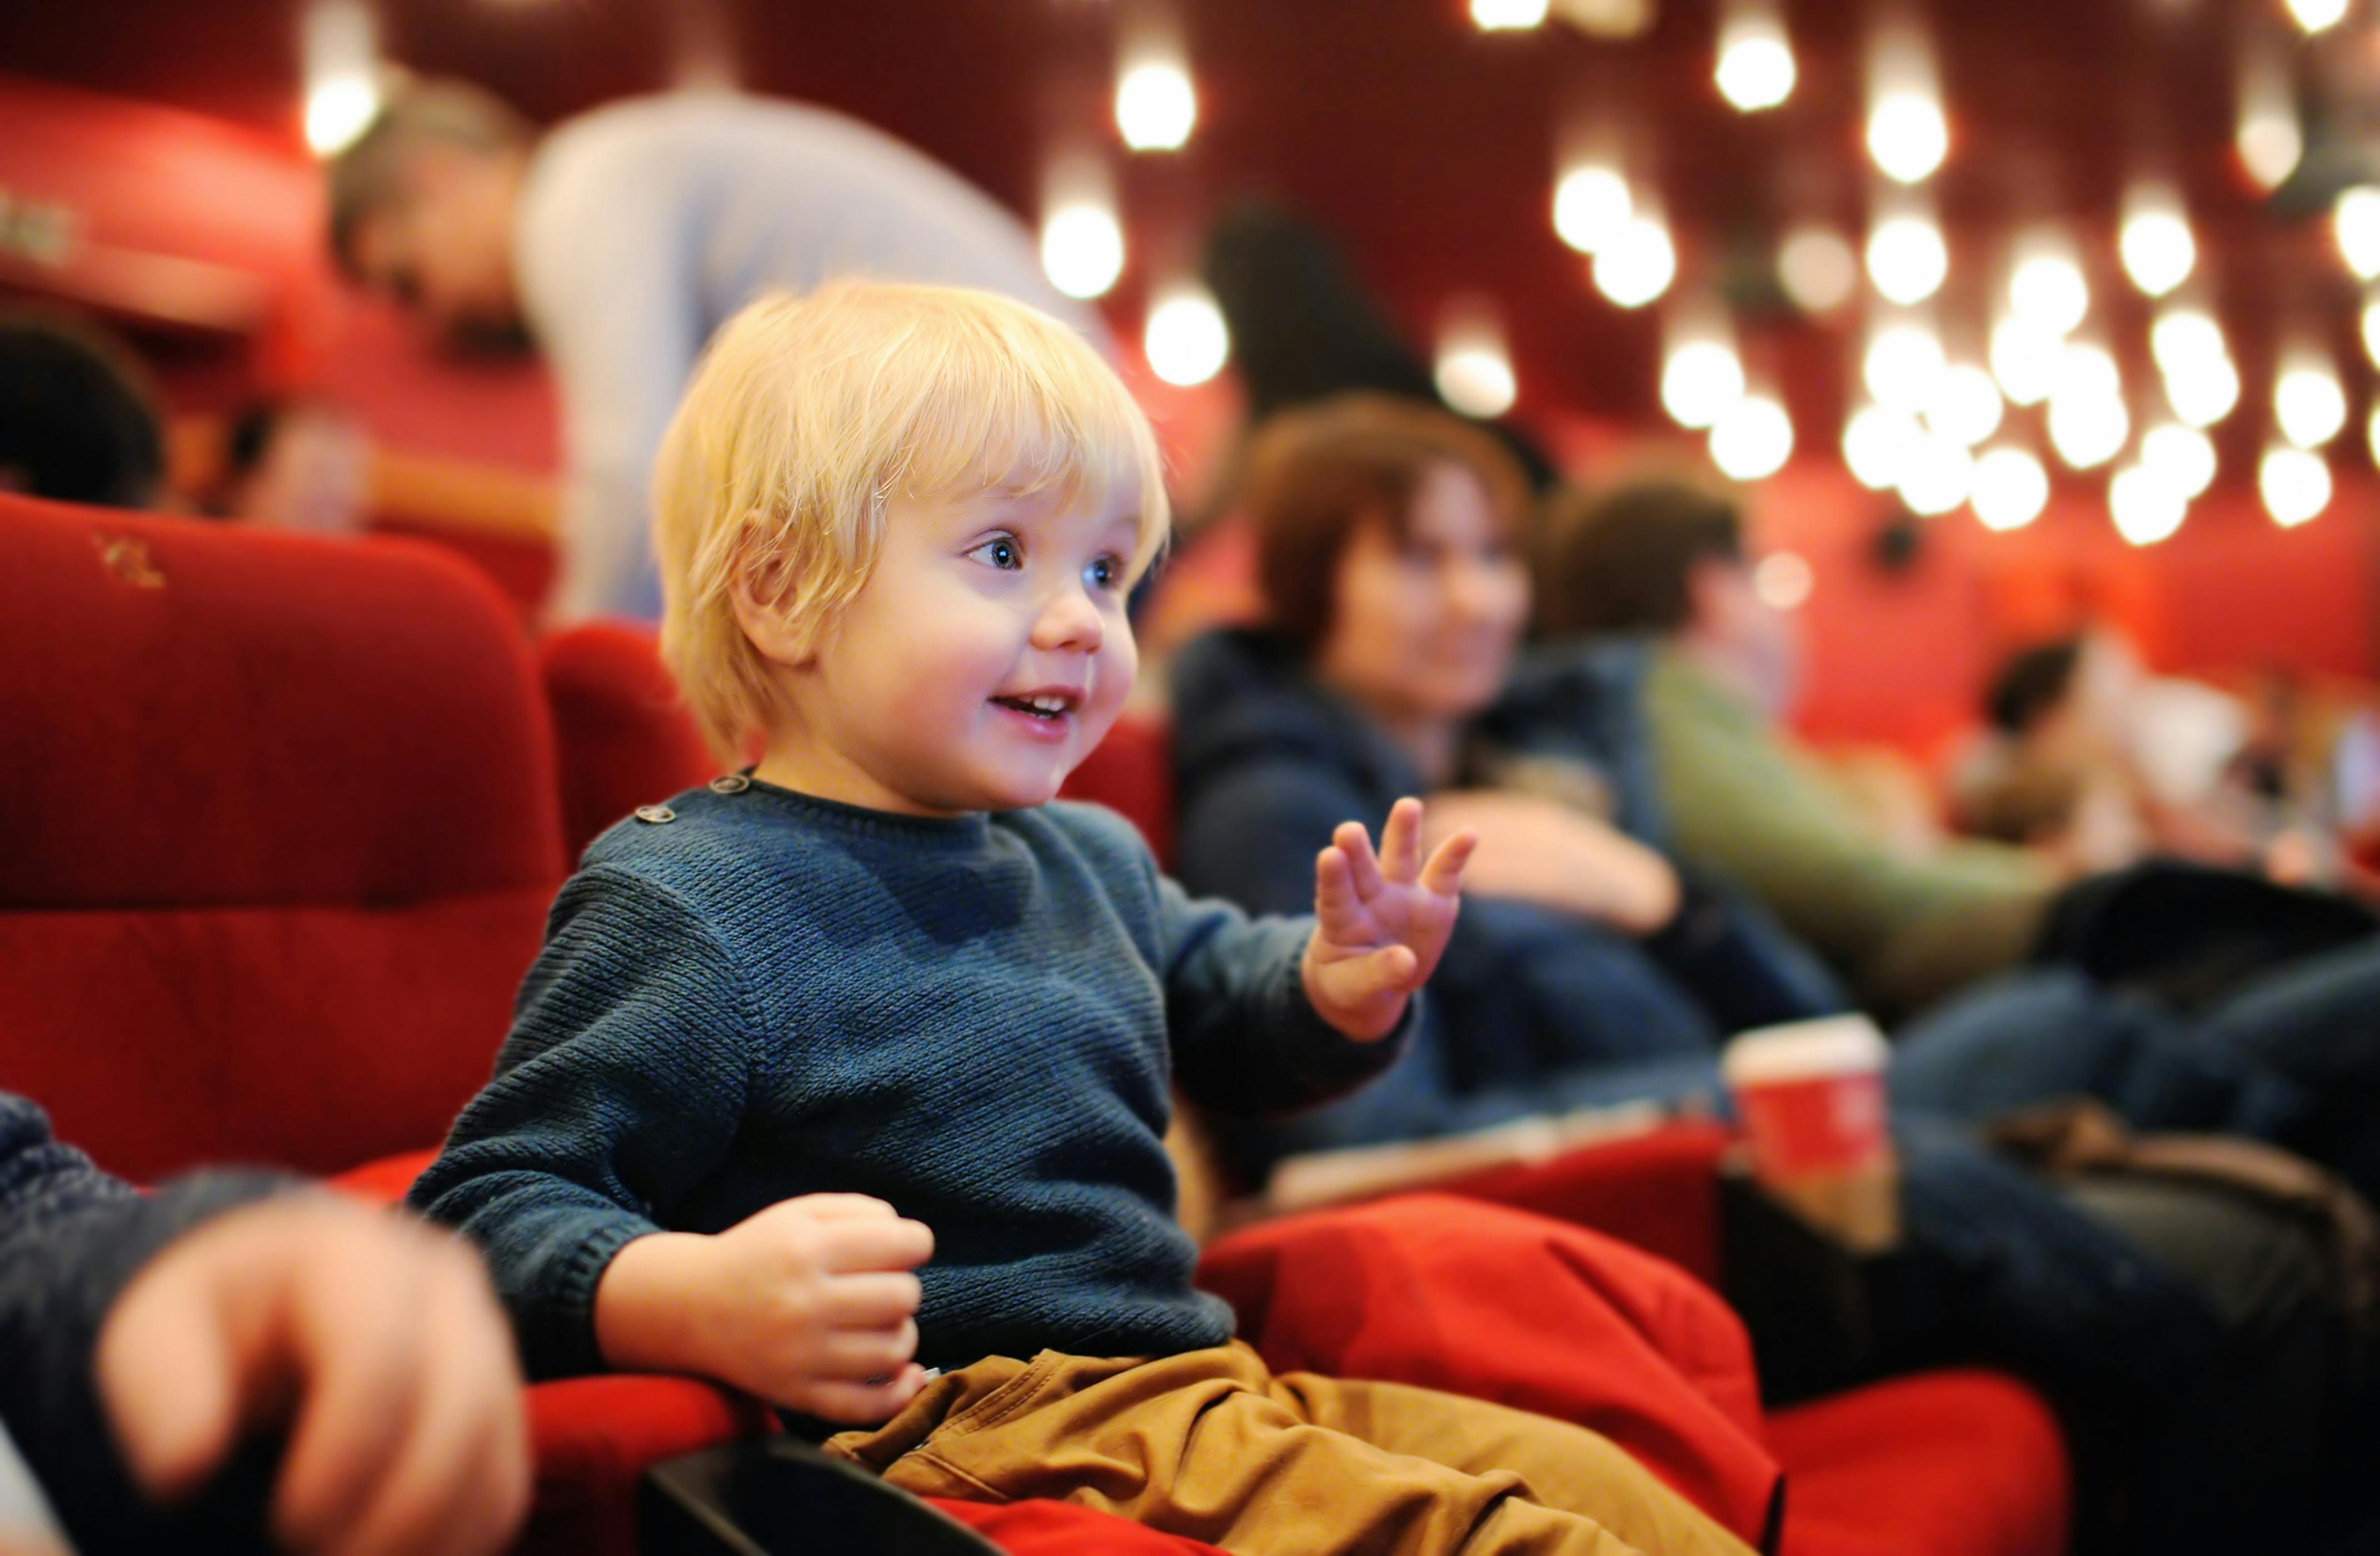 A toddler sitting in a movie theater seat and looking excitedly toward the screen.